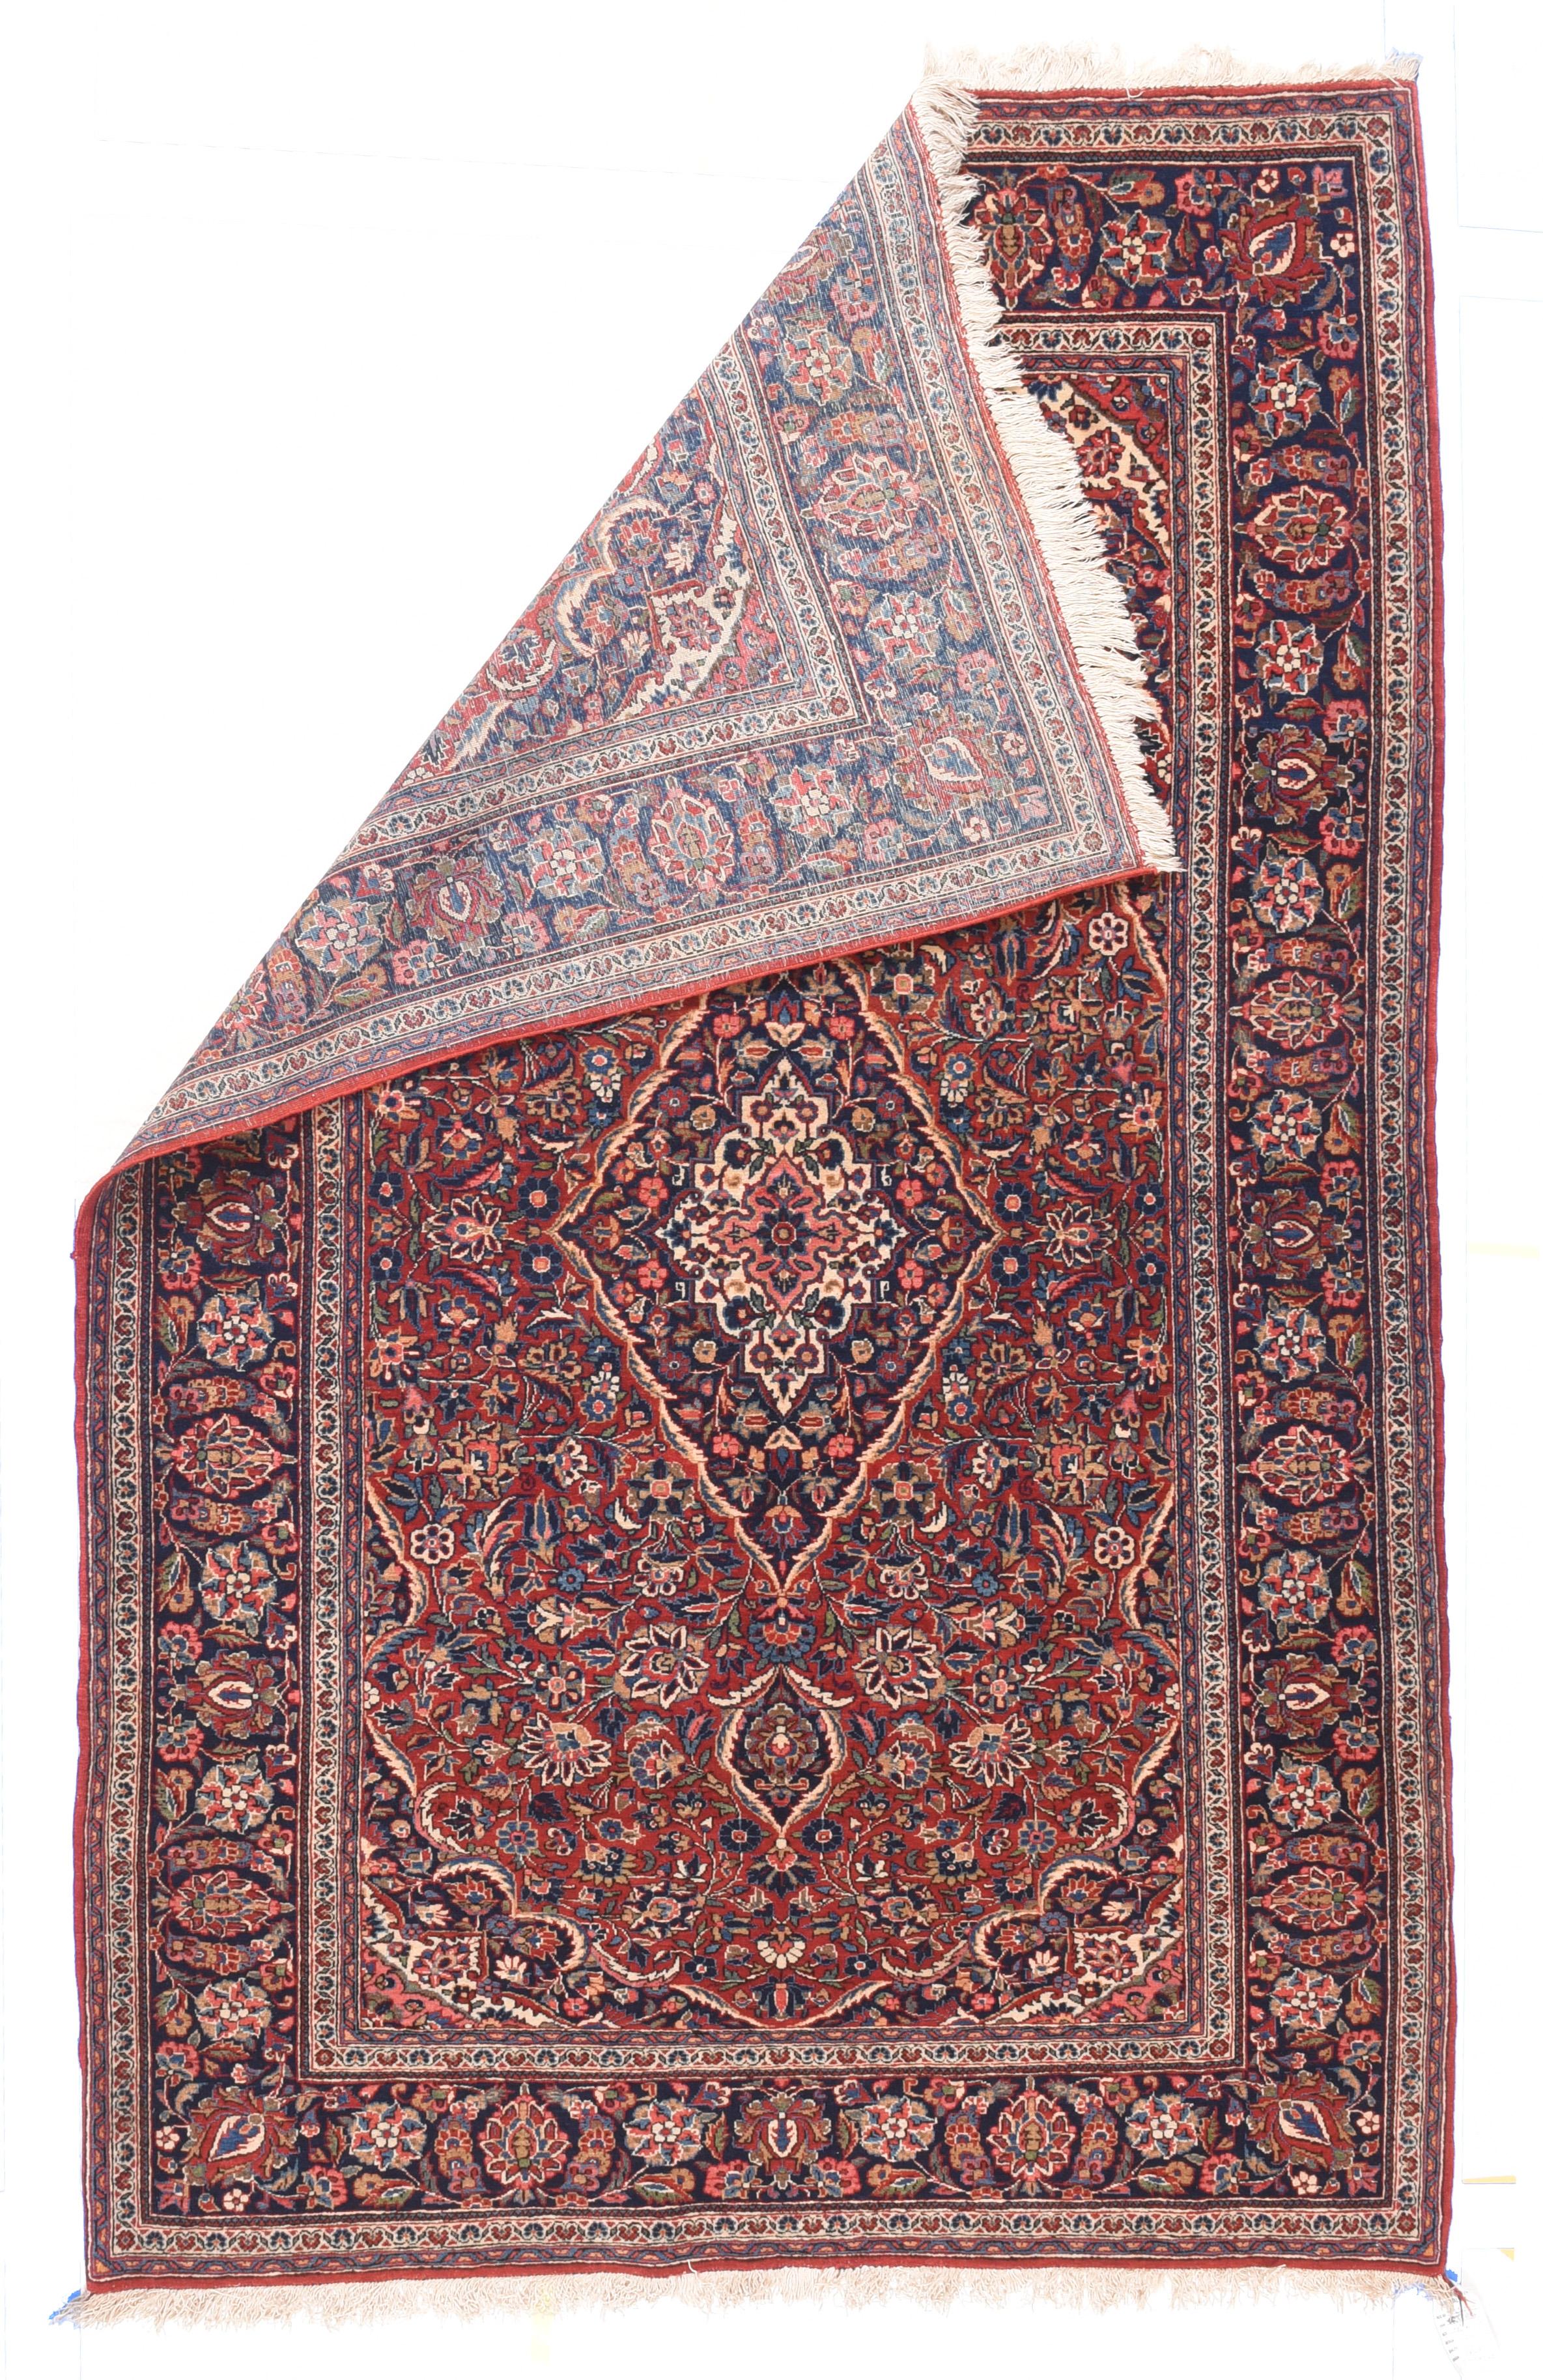 Vintage Kashan Rug 4'4'' x 7'2''. This is an absolutely iconic Interwar Period Kashan scatter from central Persia with a red/navy/cream palette expressed in a tall, lozenge medallion, swirling arabesques with petal palmettes, and a navy border with